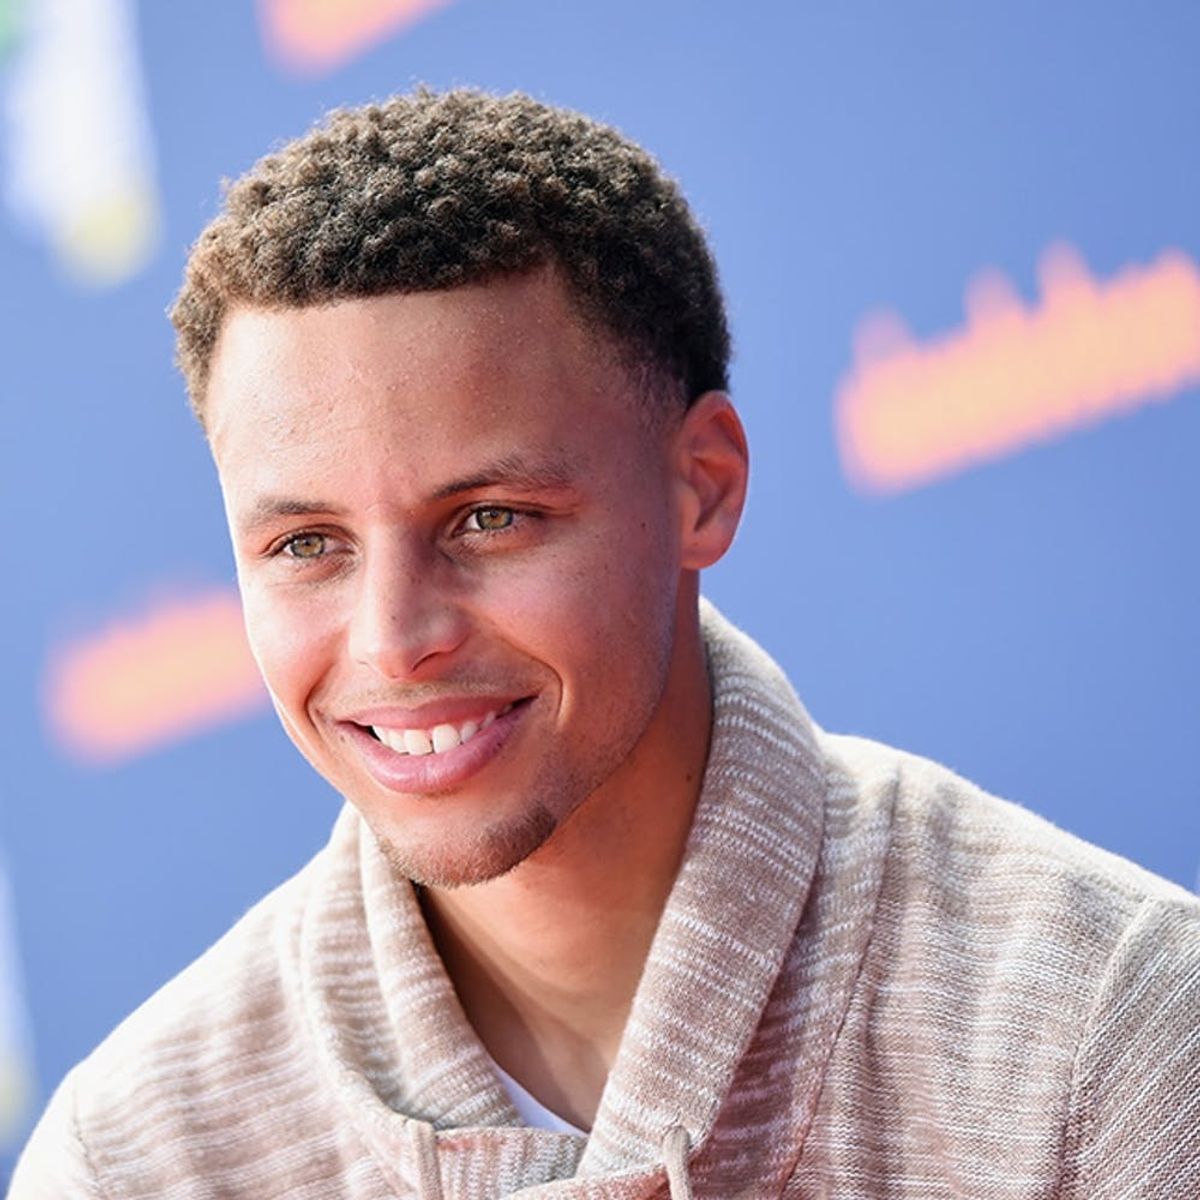 Stephen Curry Had the Cutest Date to the Nickelodeon Kids’ Choice Sports Awards